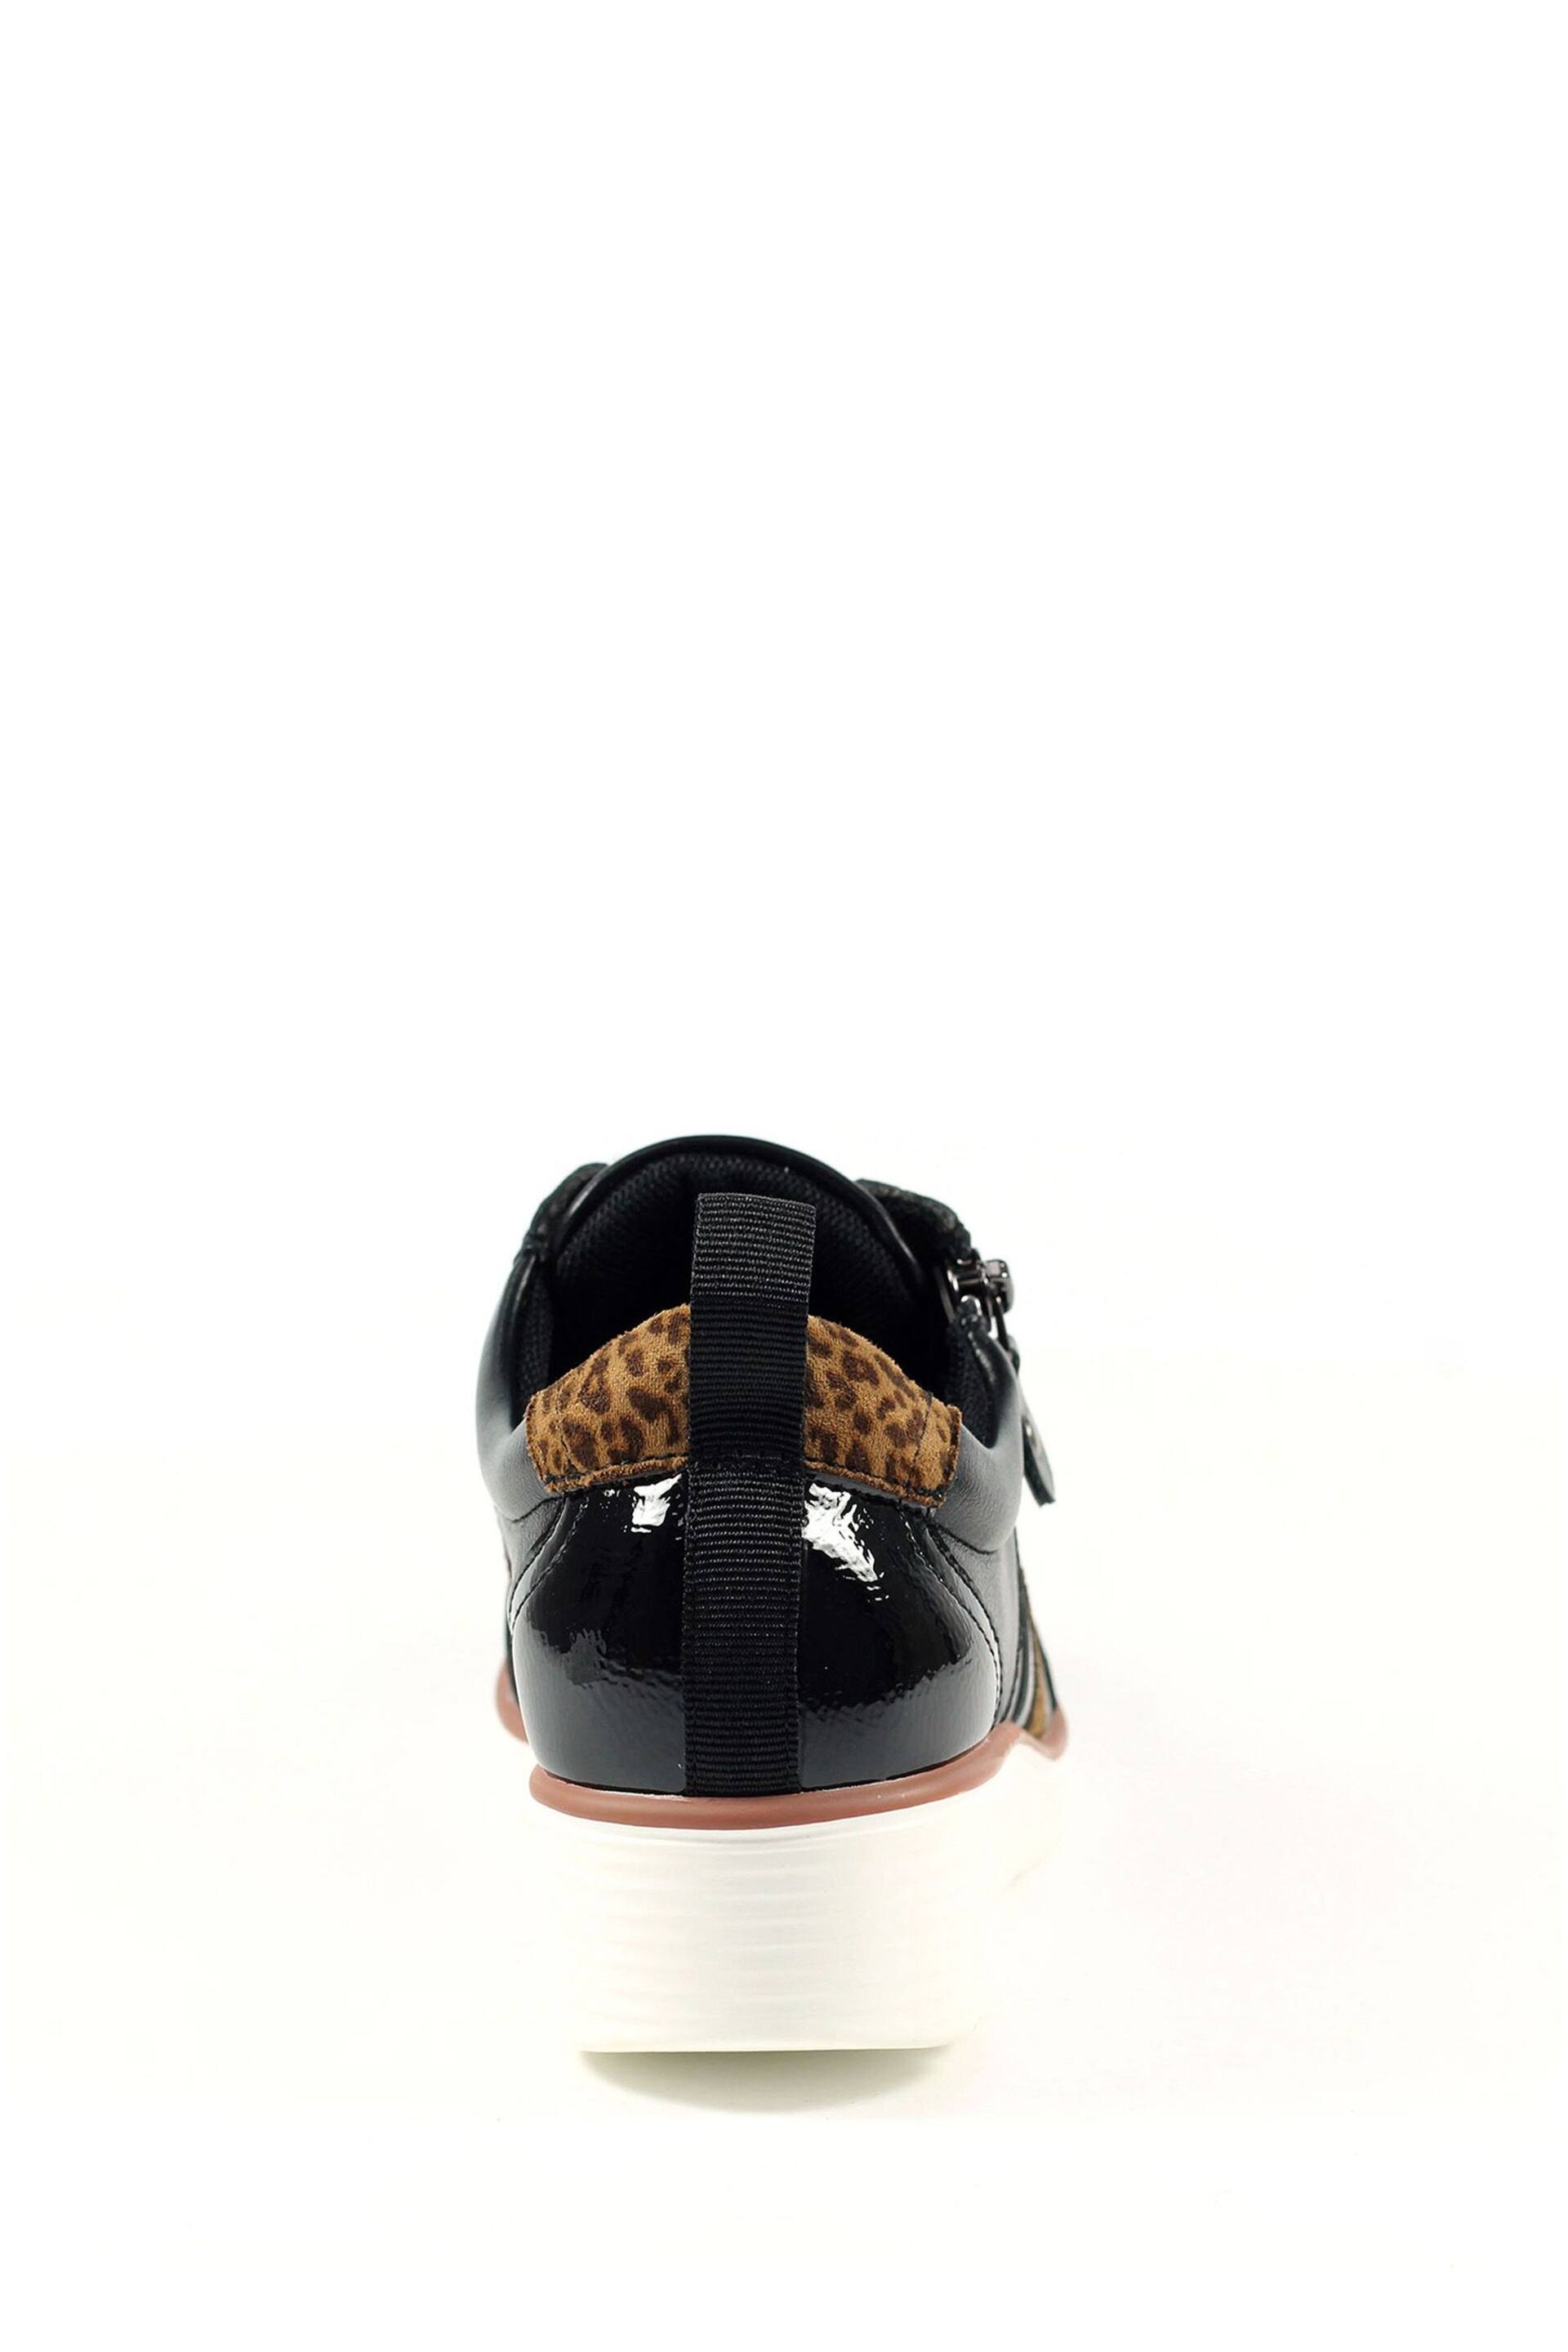 Lunar Rome Faux Leather Black Trainers - Image 4 of 8